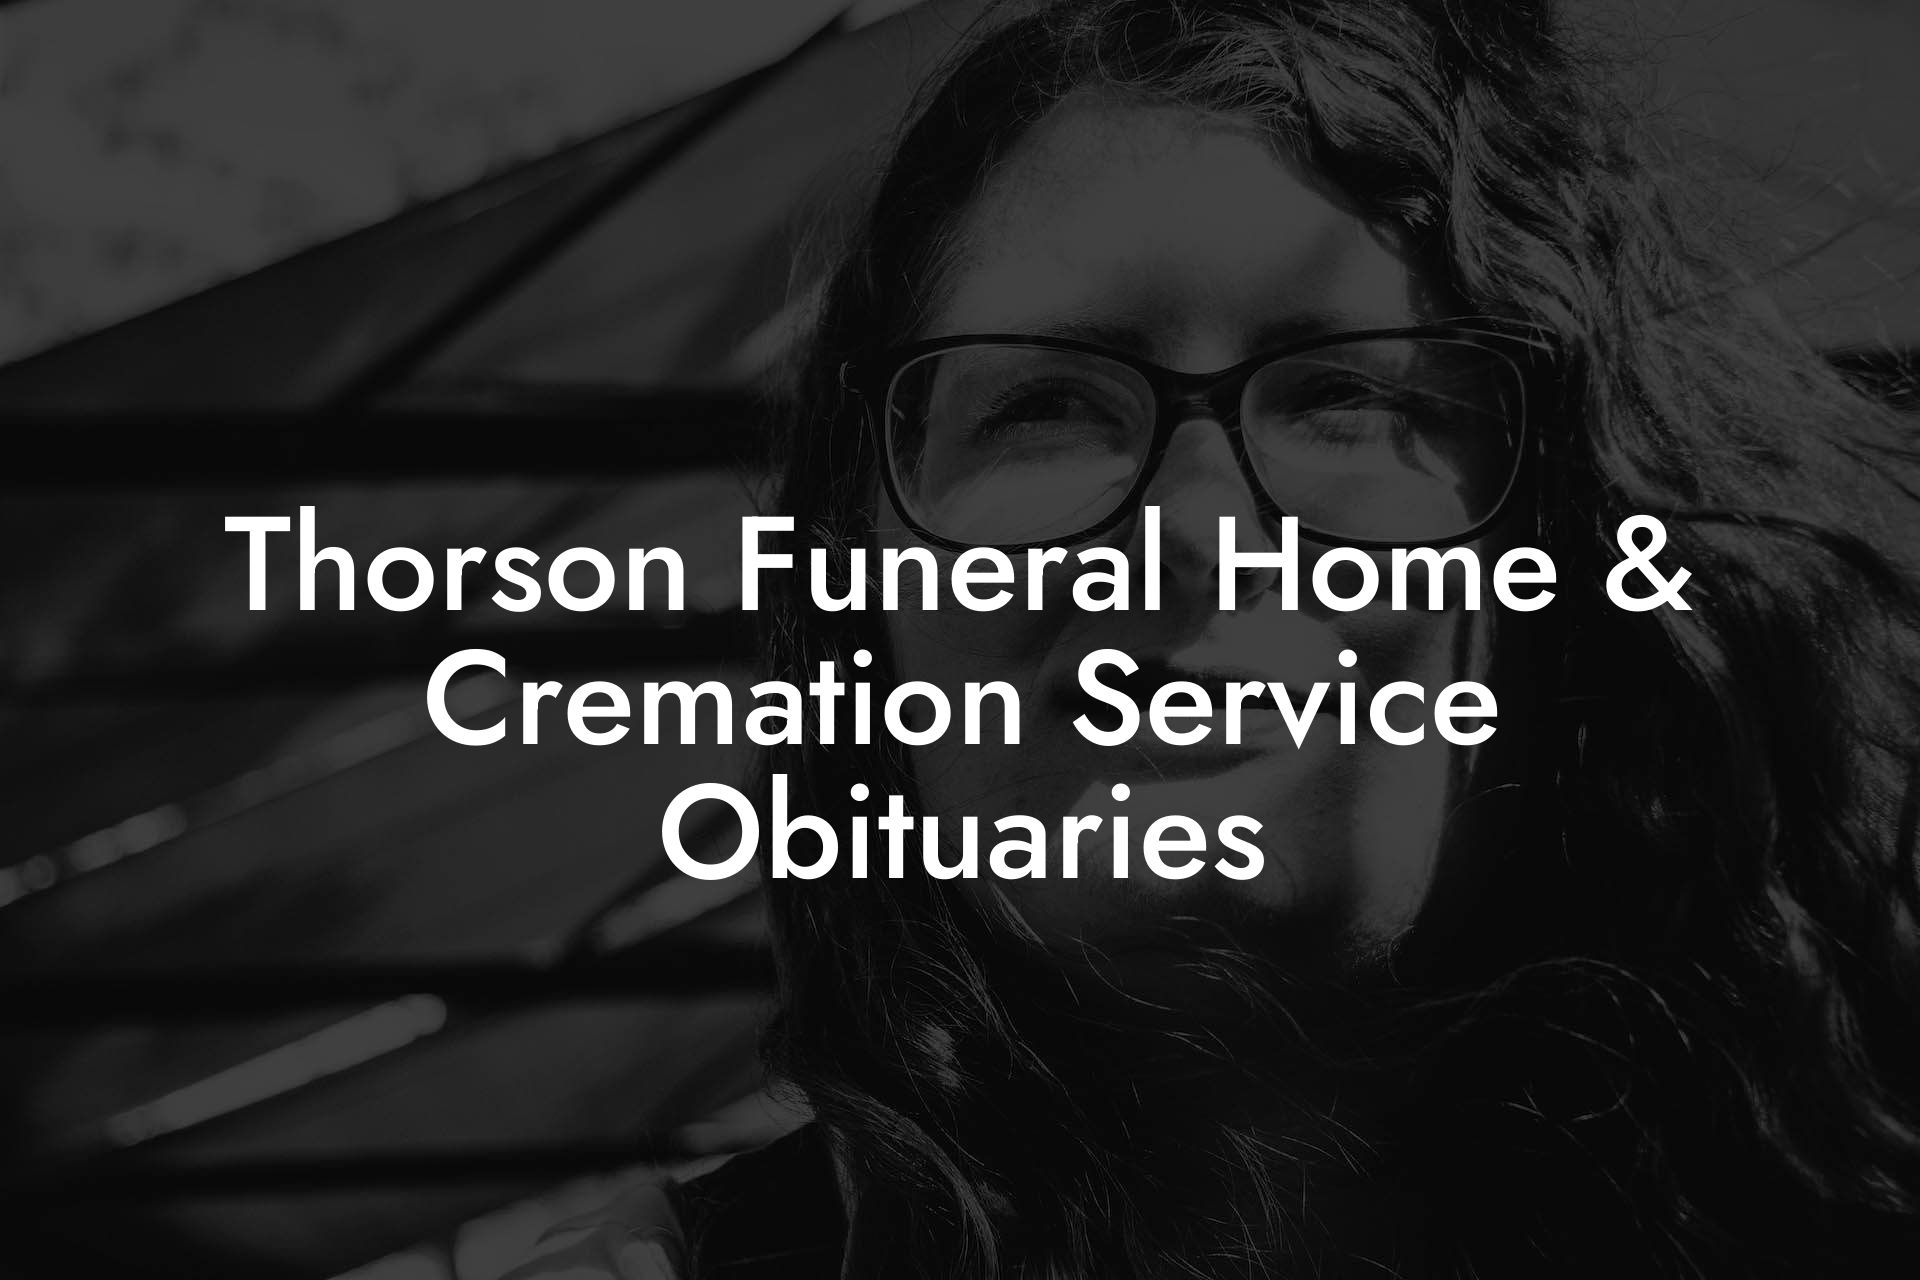 Thorson Funeral Home & Cremation Service Obituaries